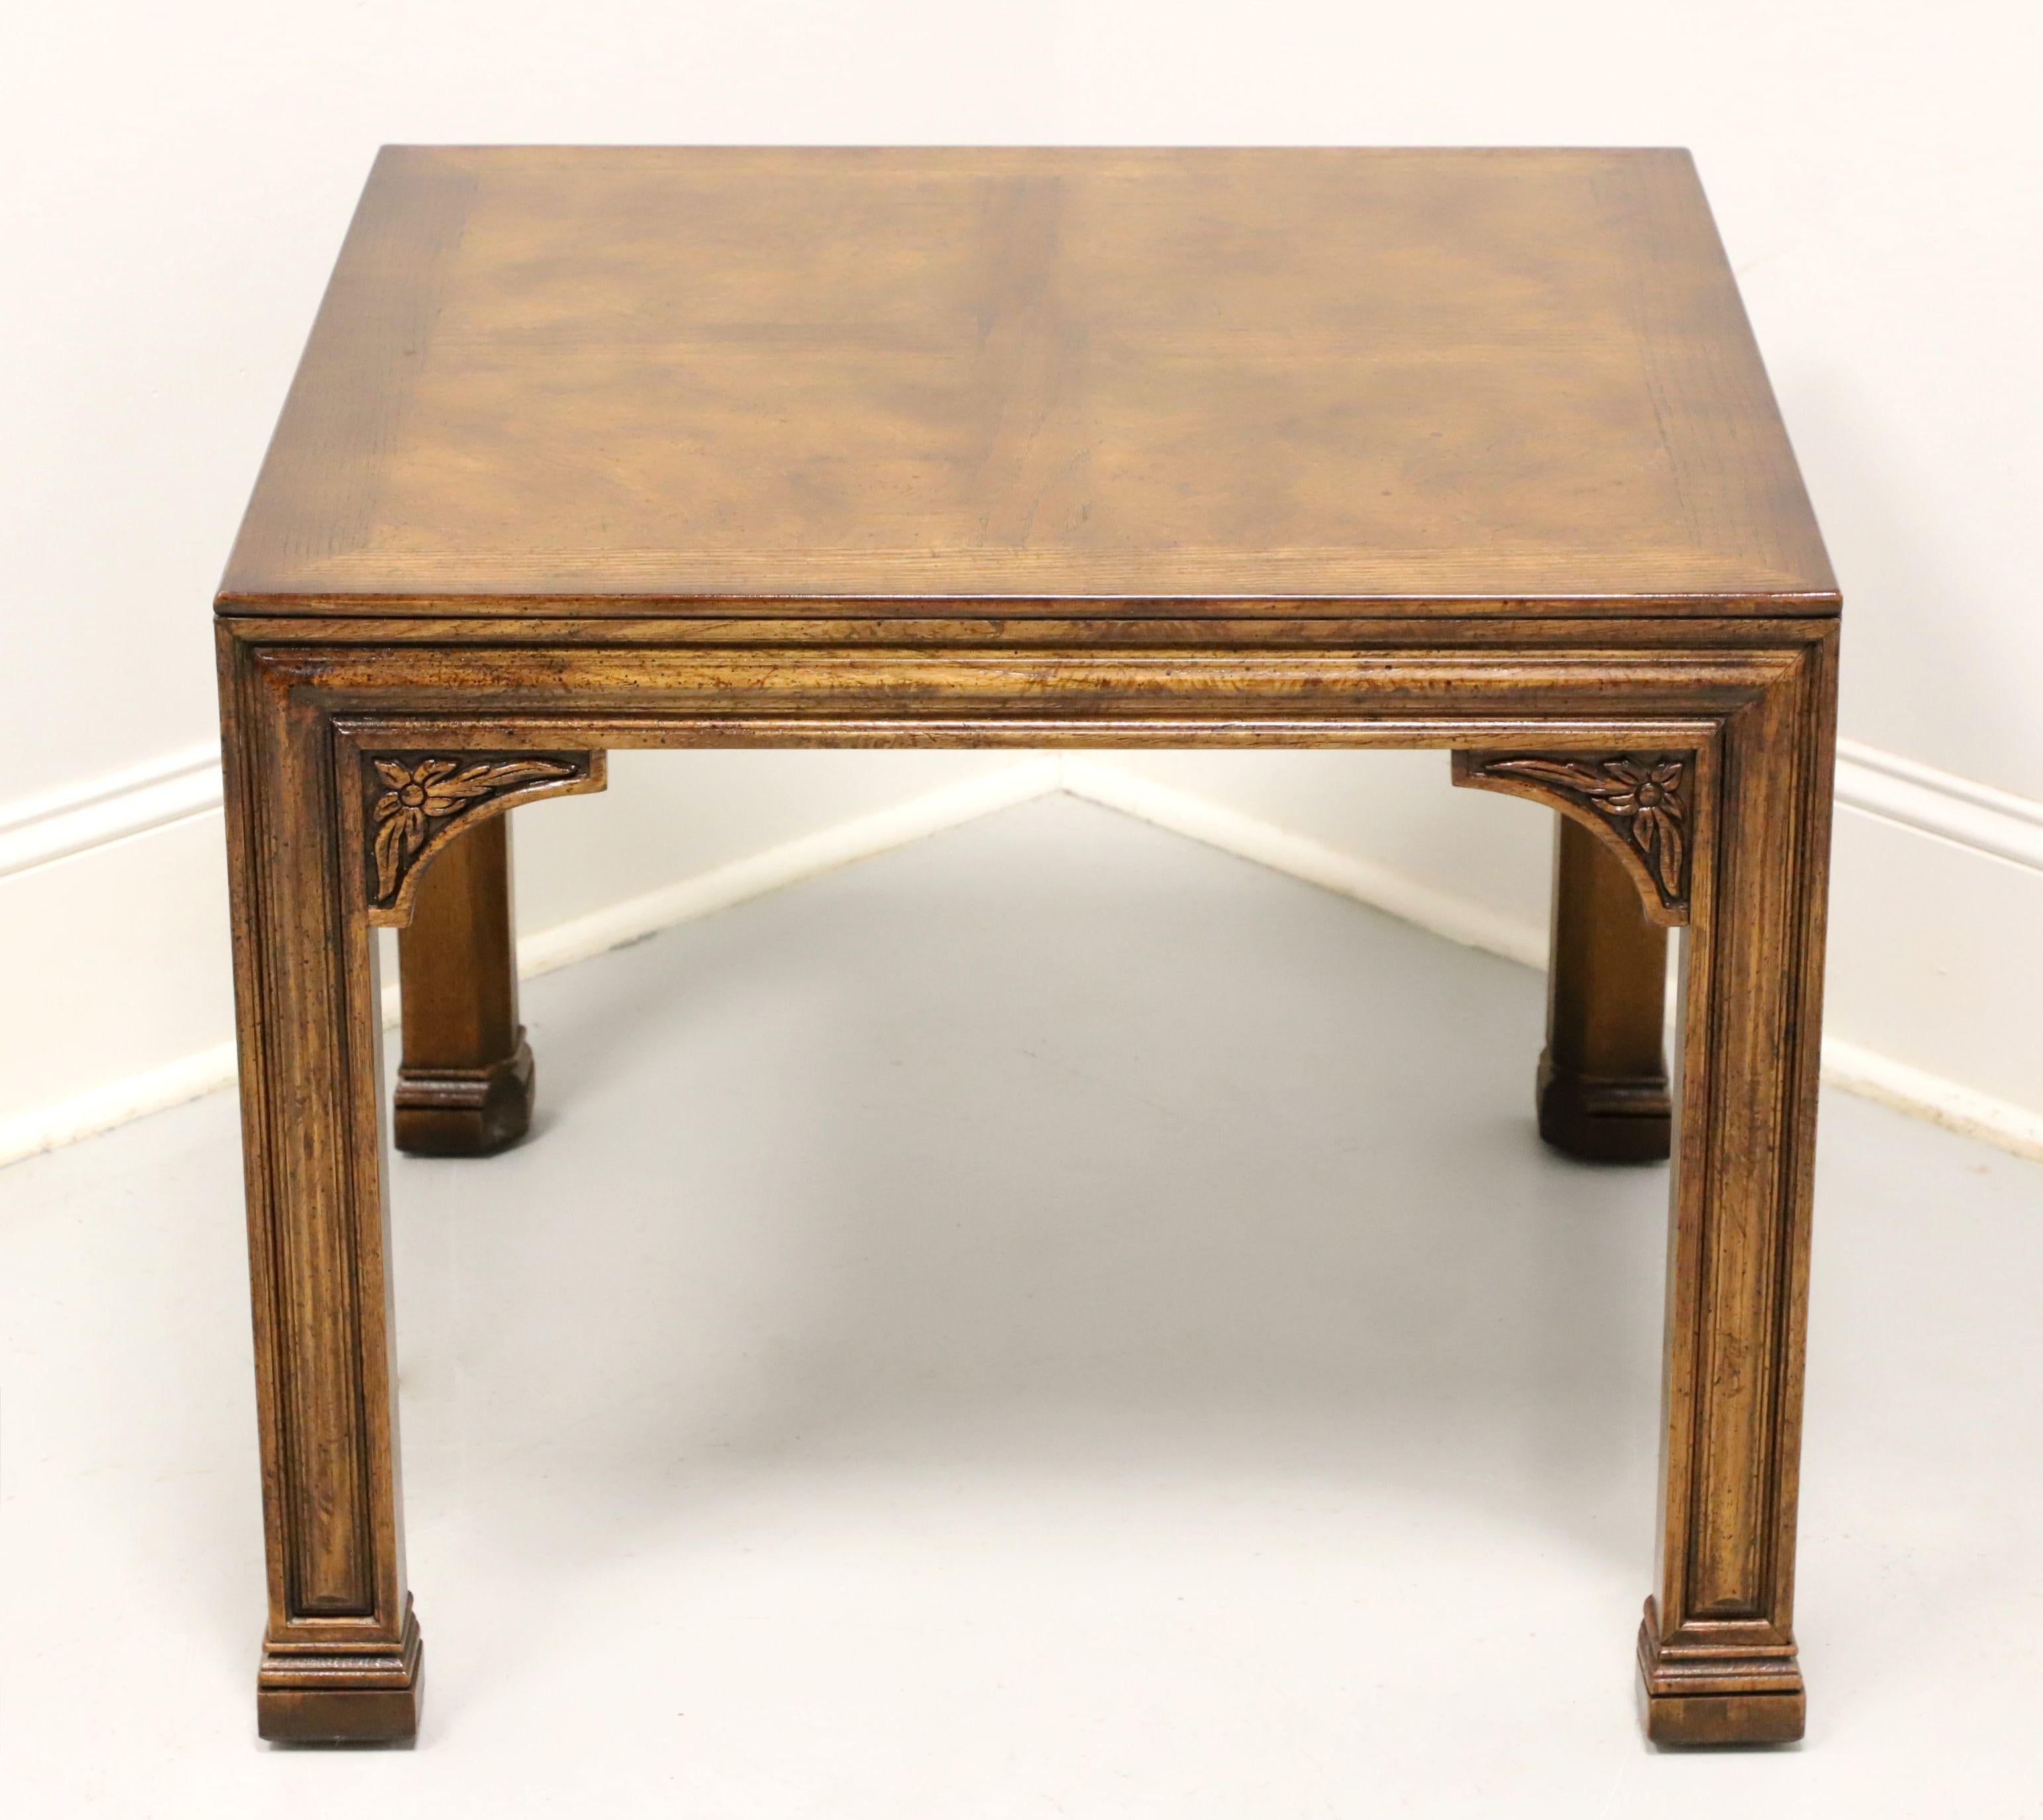 A French influenced square end table by Henredon. Oak with burl oak parquetry design to top, carved apron, decoratively carved corner joints, square straight legs, and block feet. Made in Morganton, North Carolina, USA, circa 1983.

Style #: 42